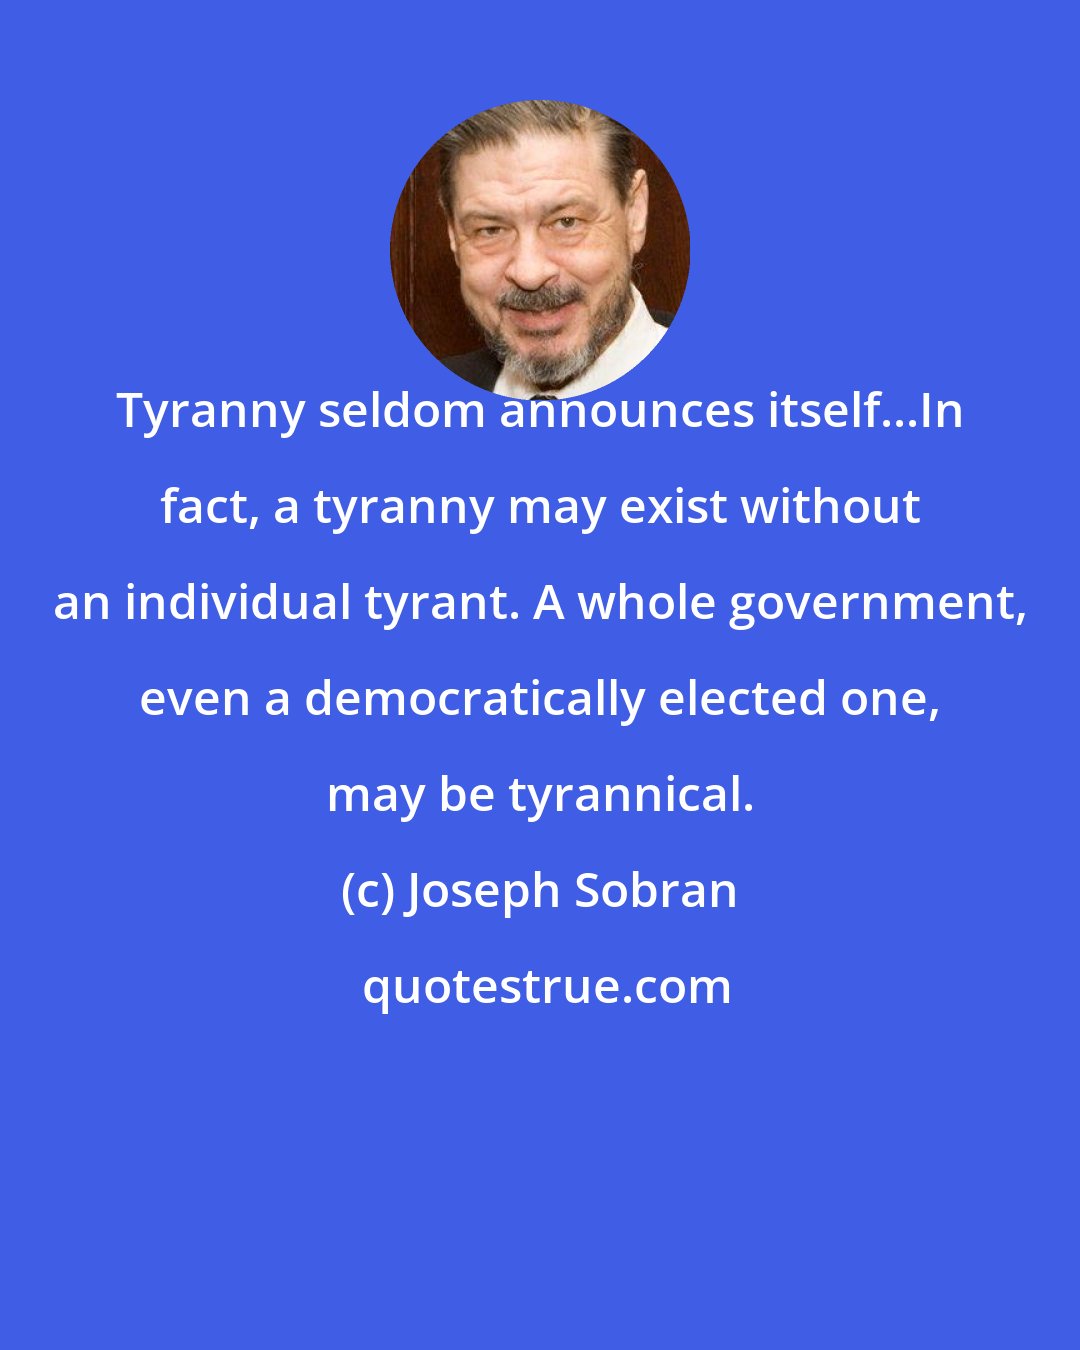 Joseph Sobran: Tyranny seldom announces itself...In fact, a tyranny may exist without an individual tyrant. A whole government, even a democratically elected one, may be tyrannical.